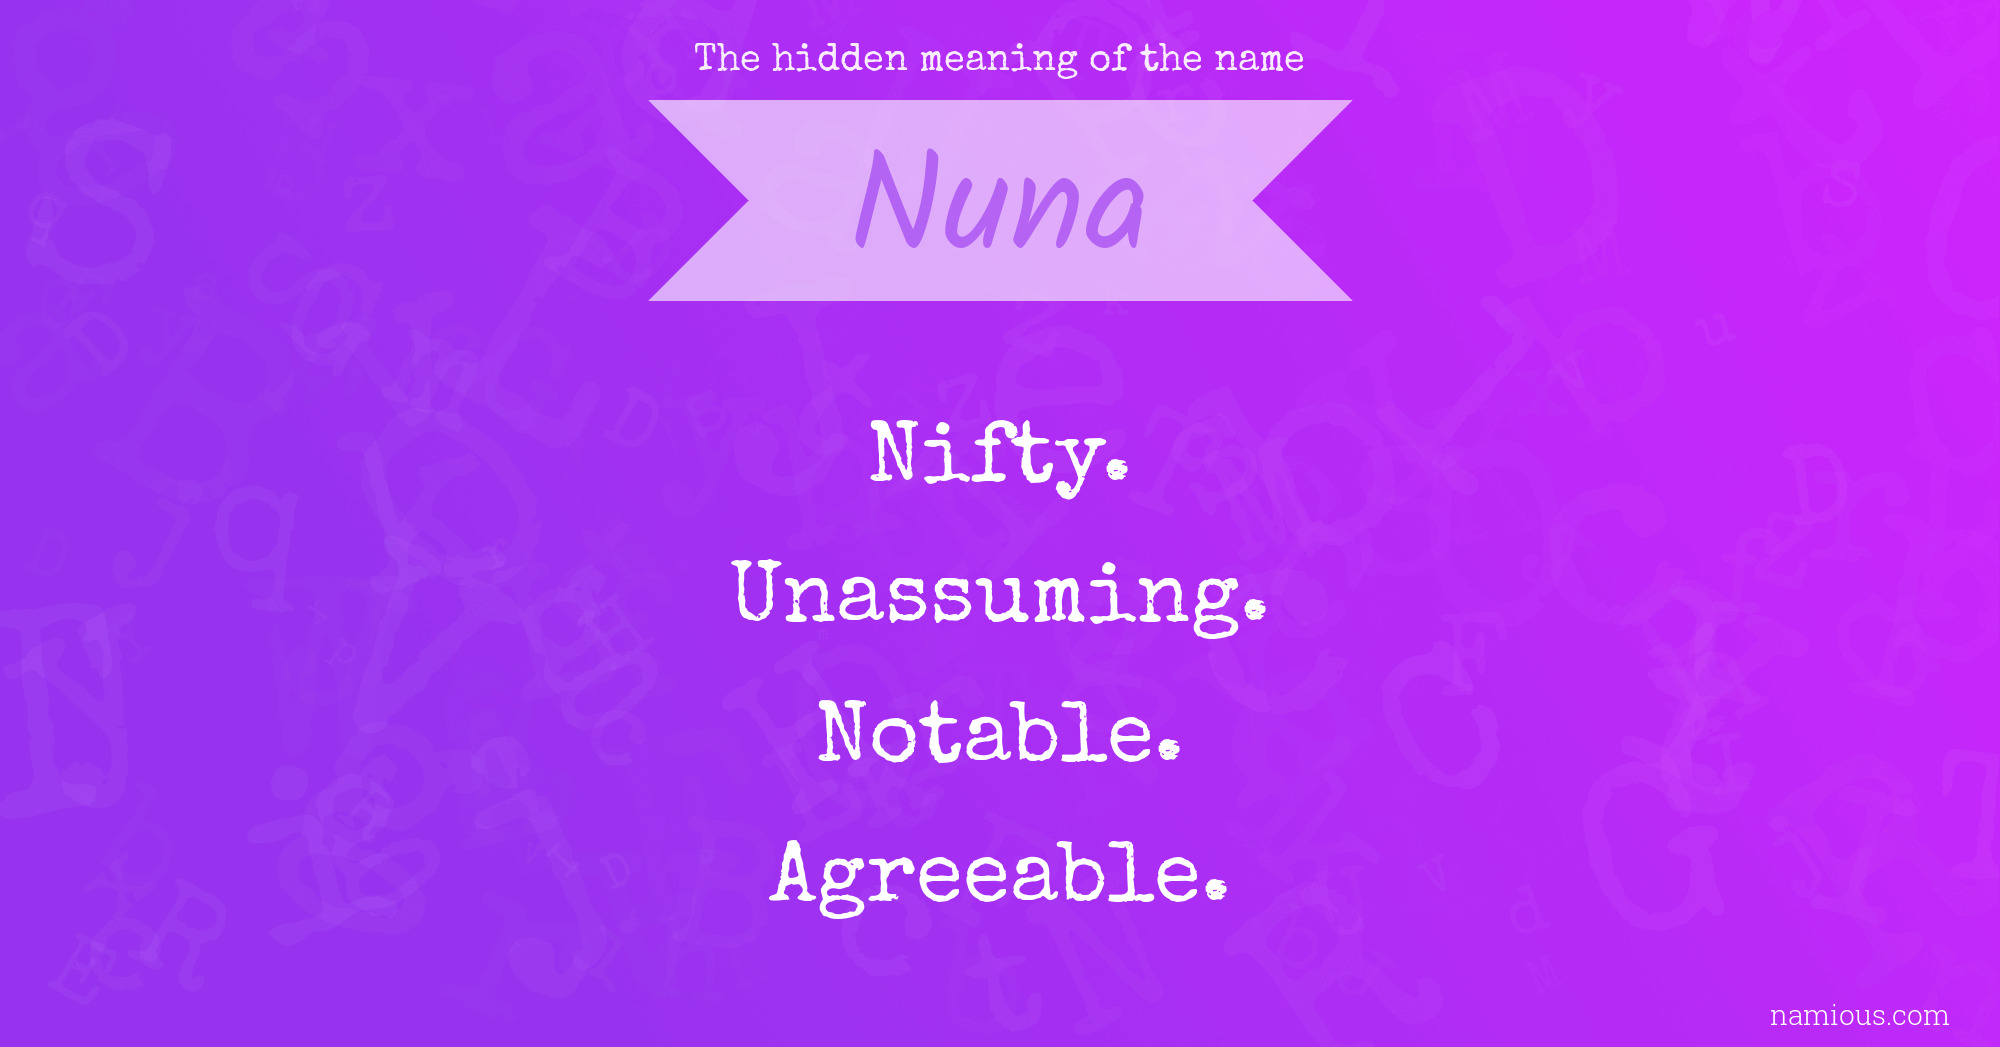 The hidden meaning of the name Nuna